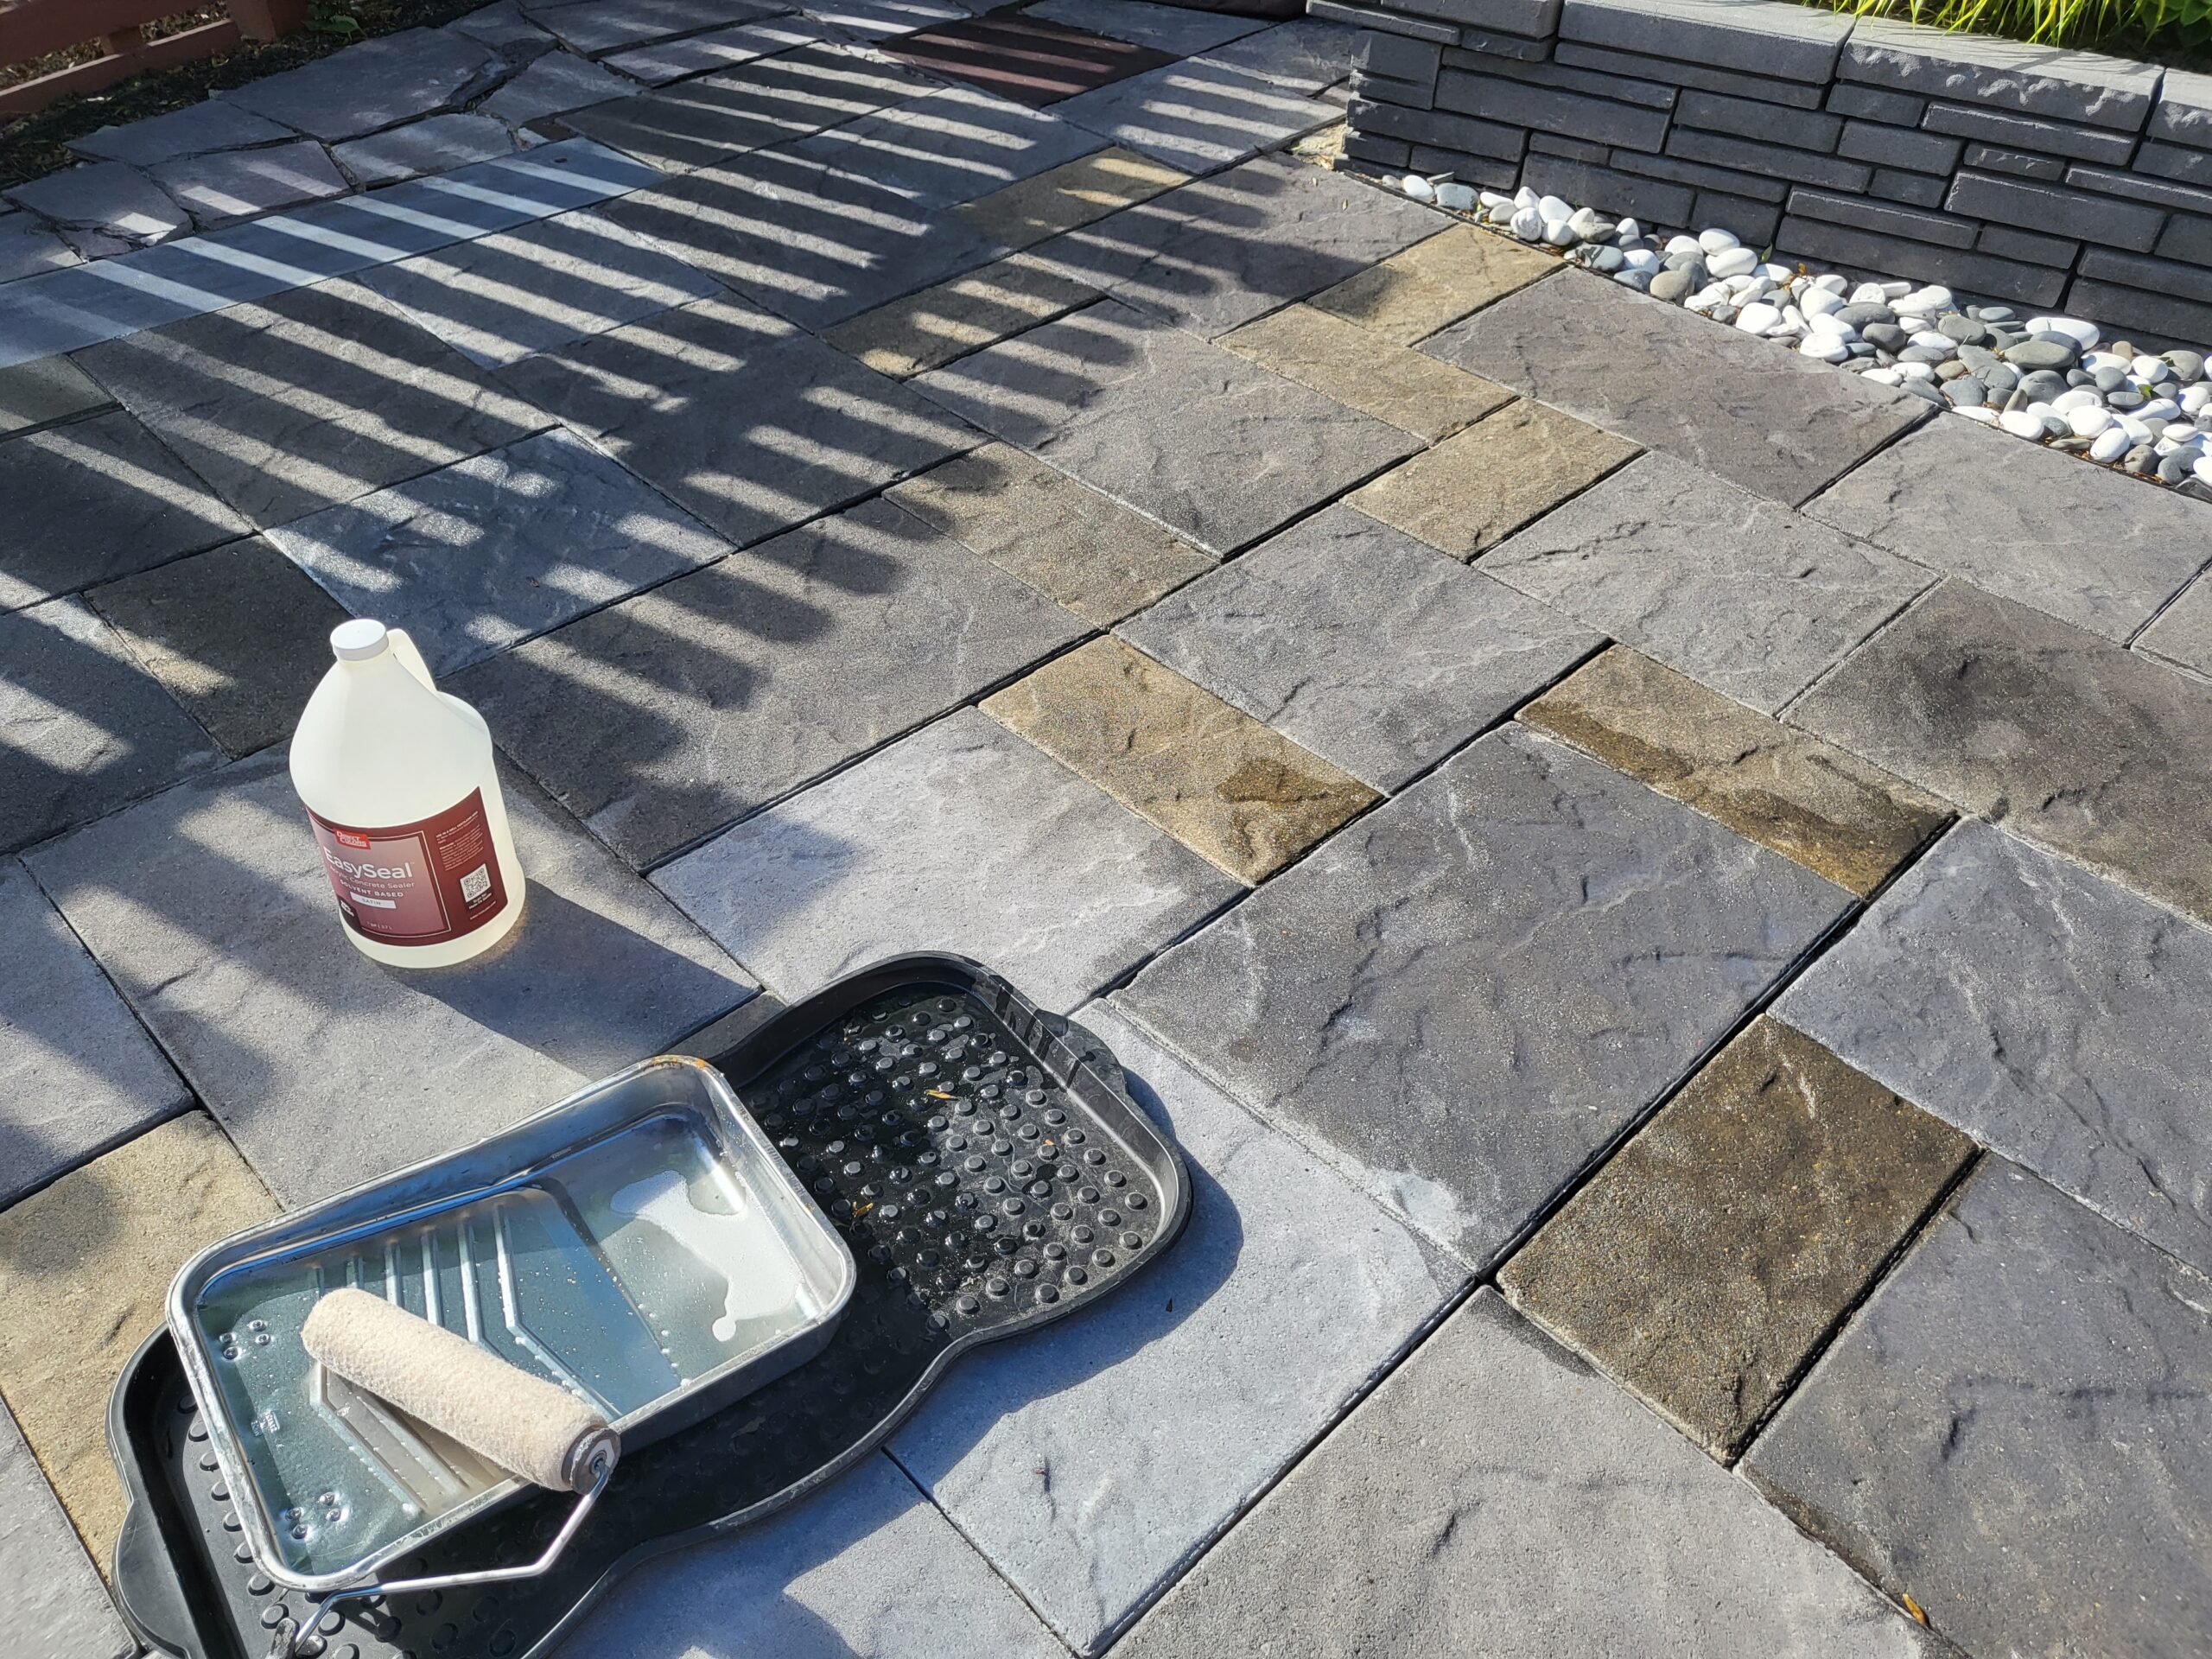 Image illustrating the application of EasySeal with a foam roller over the Antiquing stain on a concrete surface, a process that enhances and seals in the vibrant stain colors for a more striking appearance